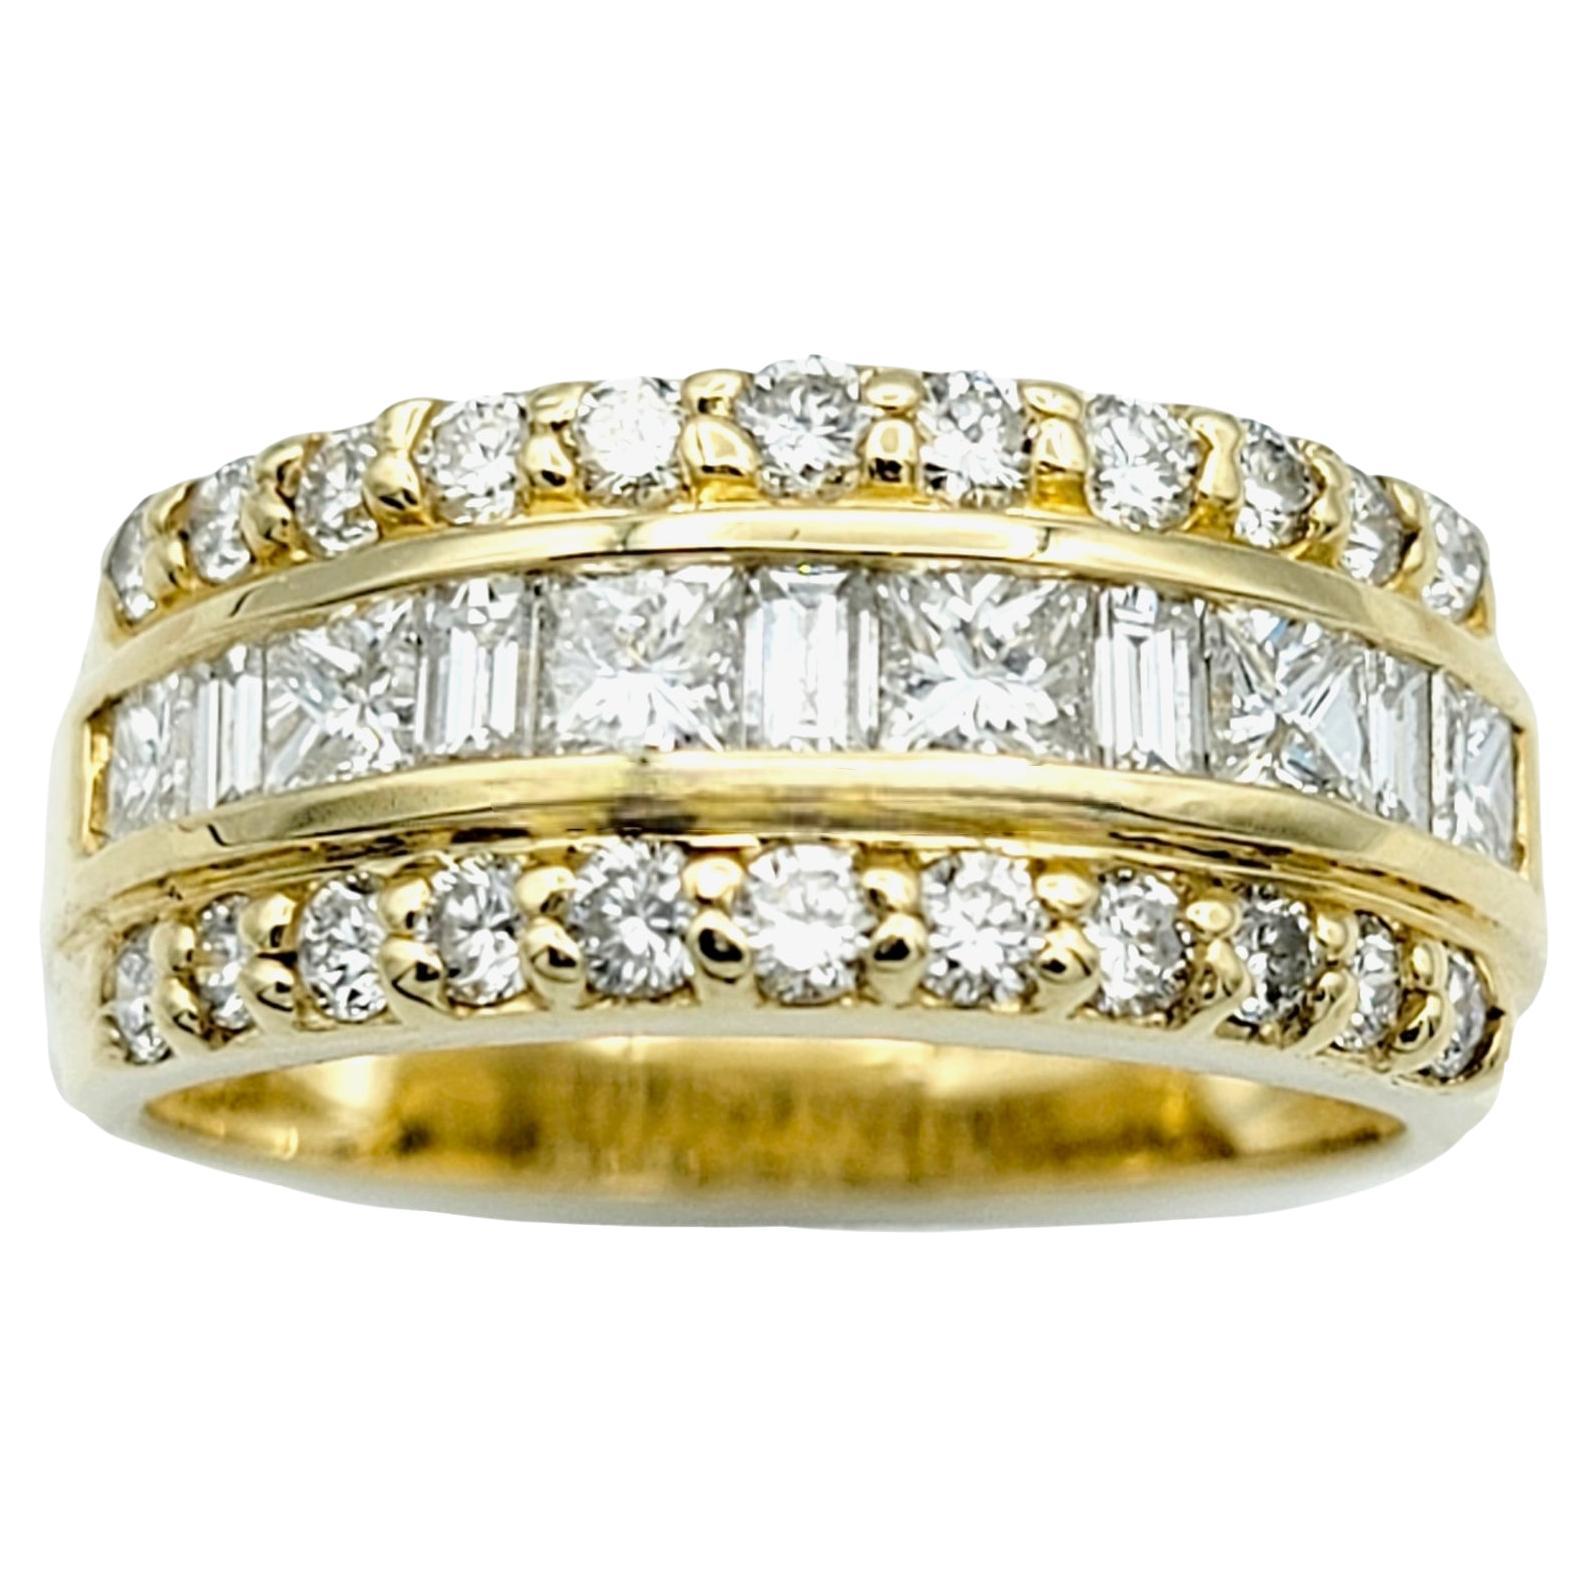 Three Row Round, Princess and Baguette Diamond Semi-Eternity Band Ring 14K Gold